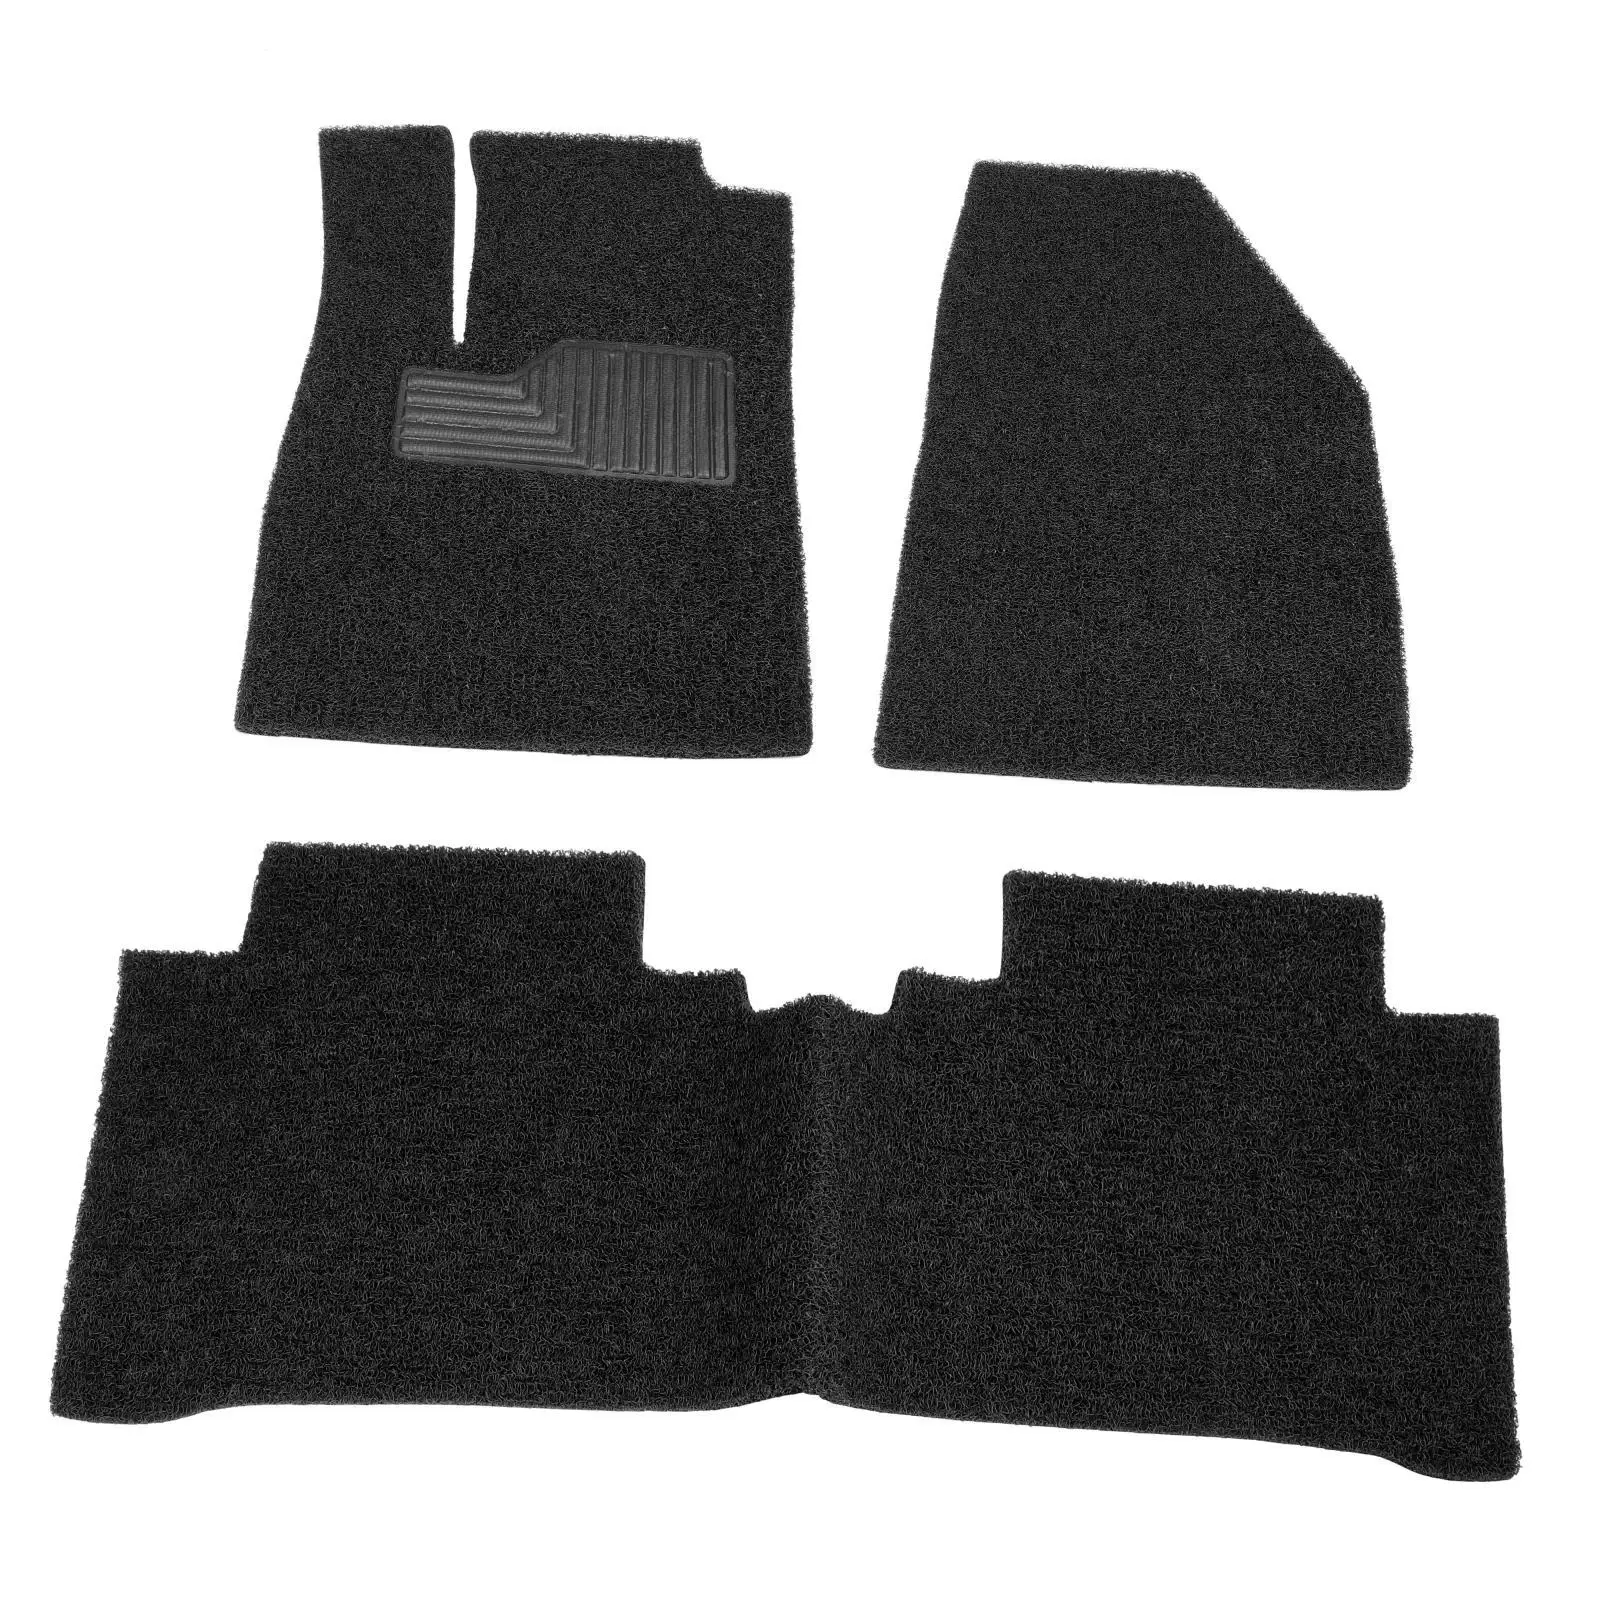 3x Car Floor Mats Strong Resilience Protection Convenient Wear Resistant PVC for Byd Yuan Plus Atto 3 21-23